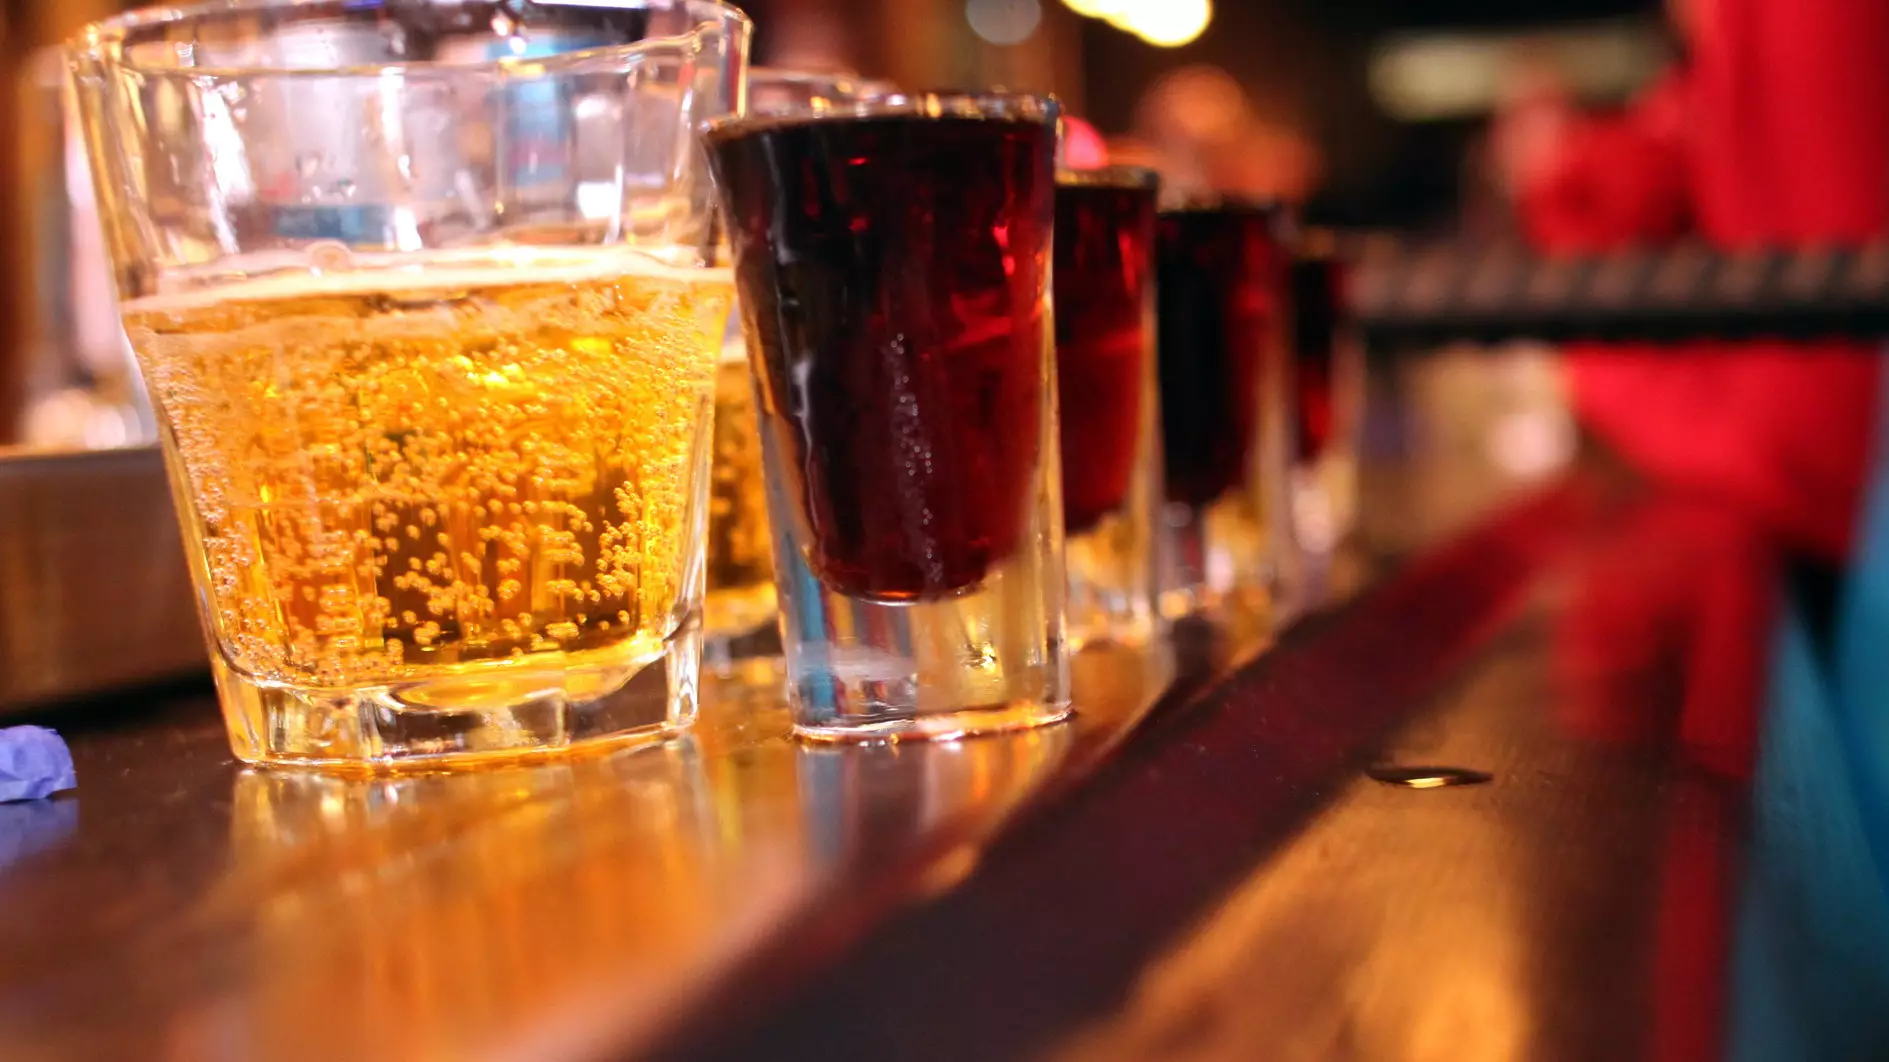 Mum Criticises Drinks Deal After Underage Daughter Buys 10 Jägerbombs For £7.50